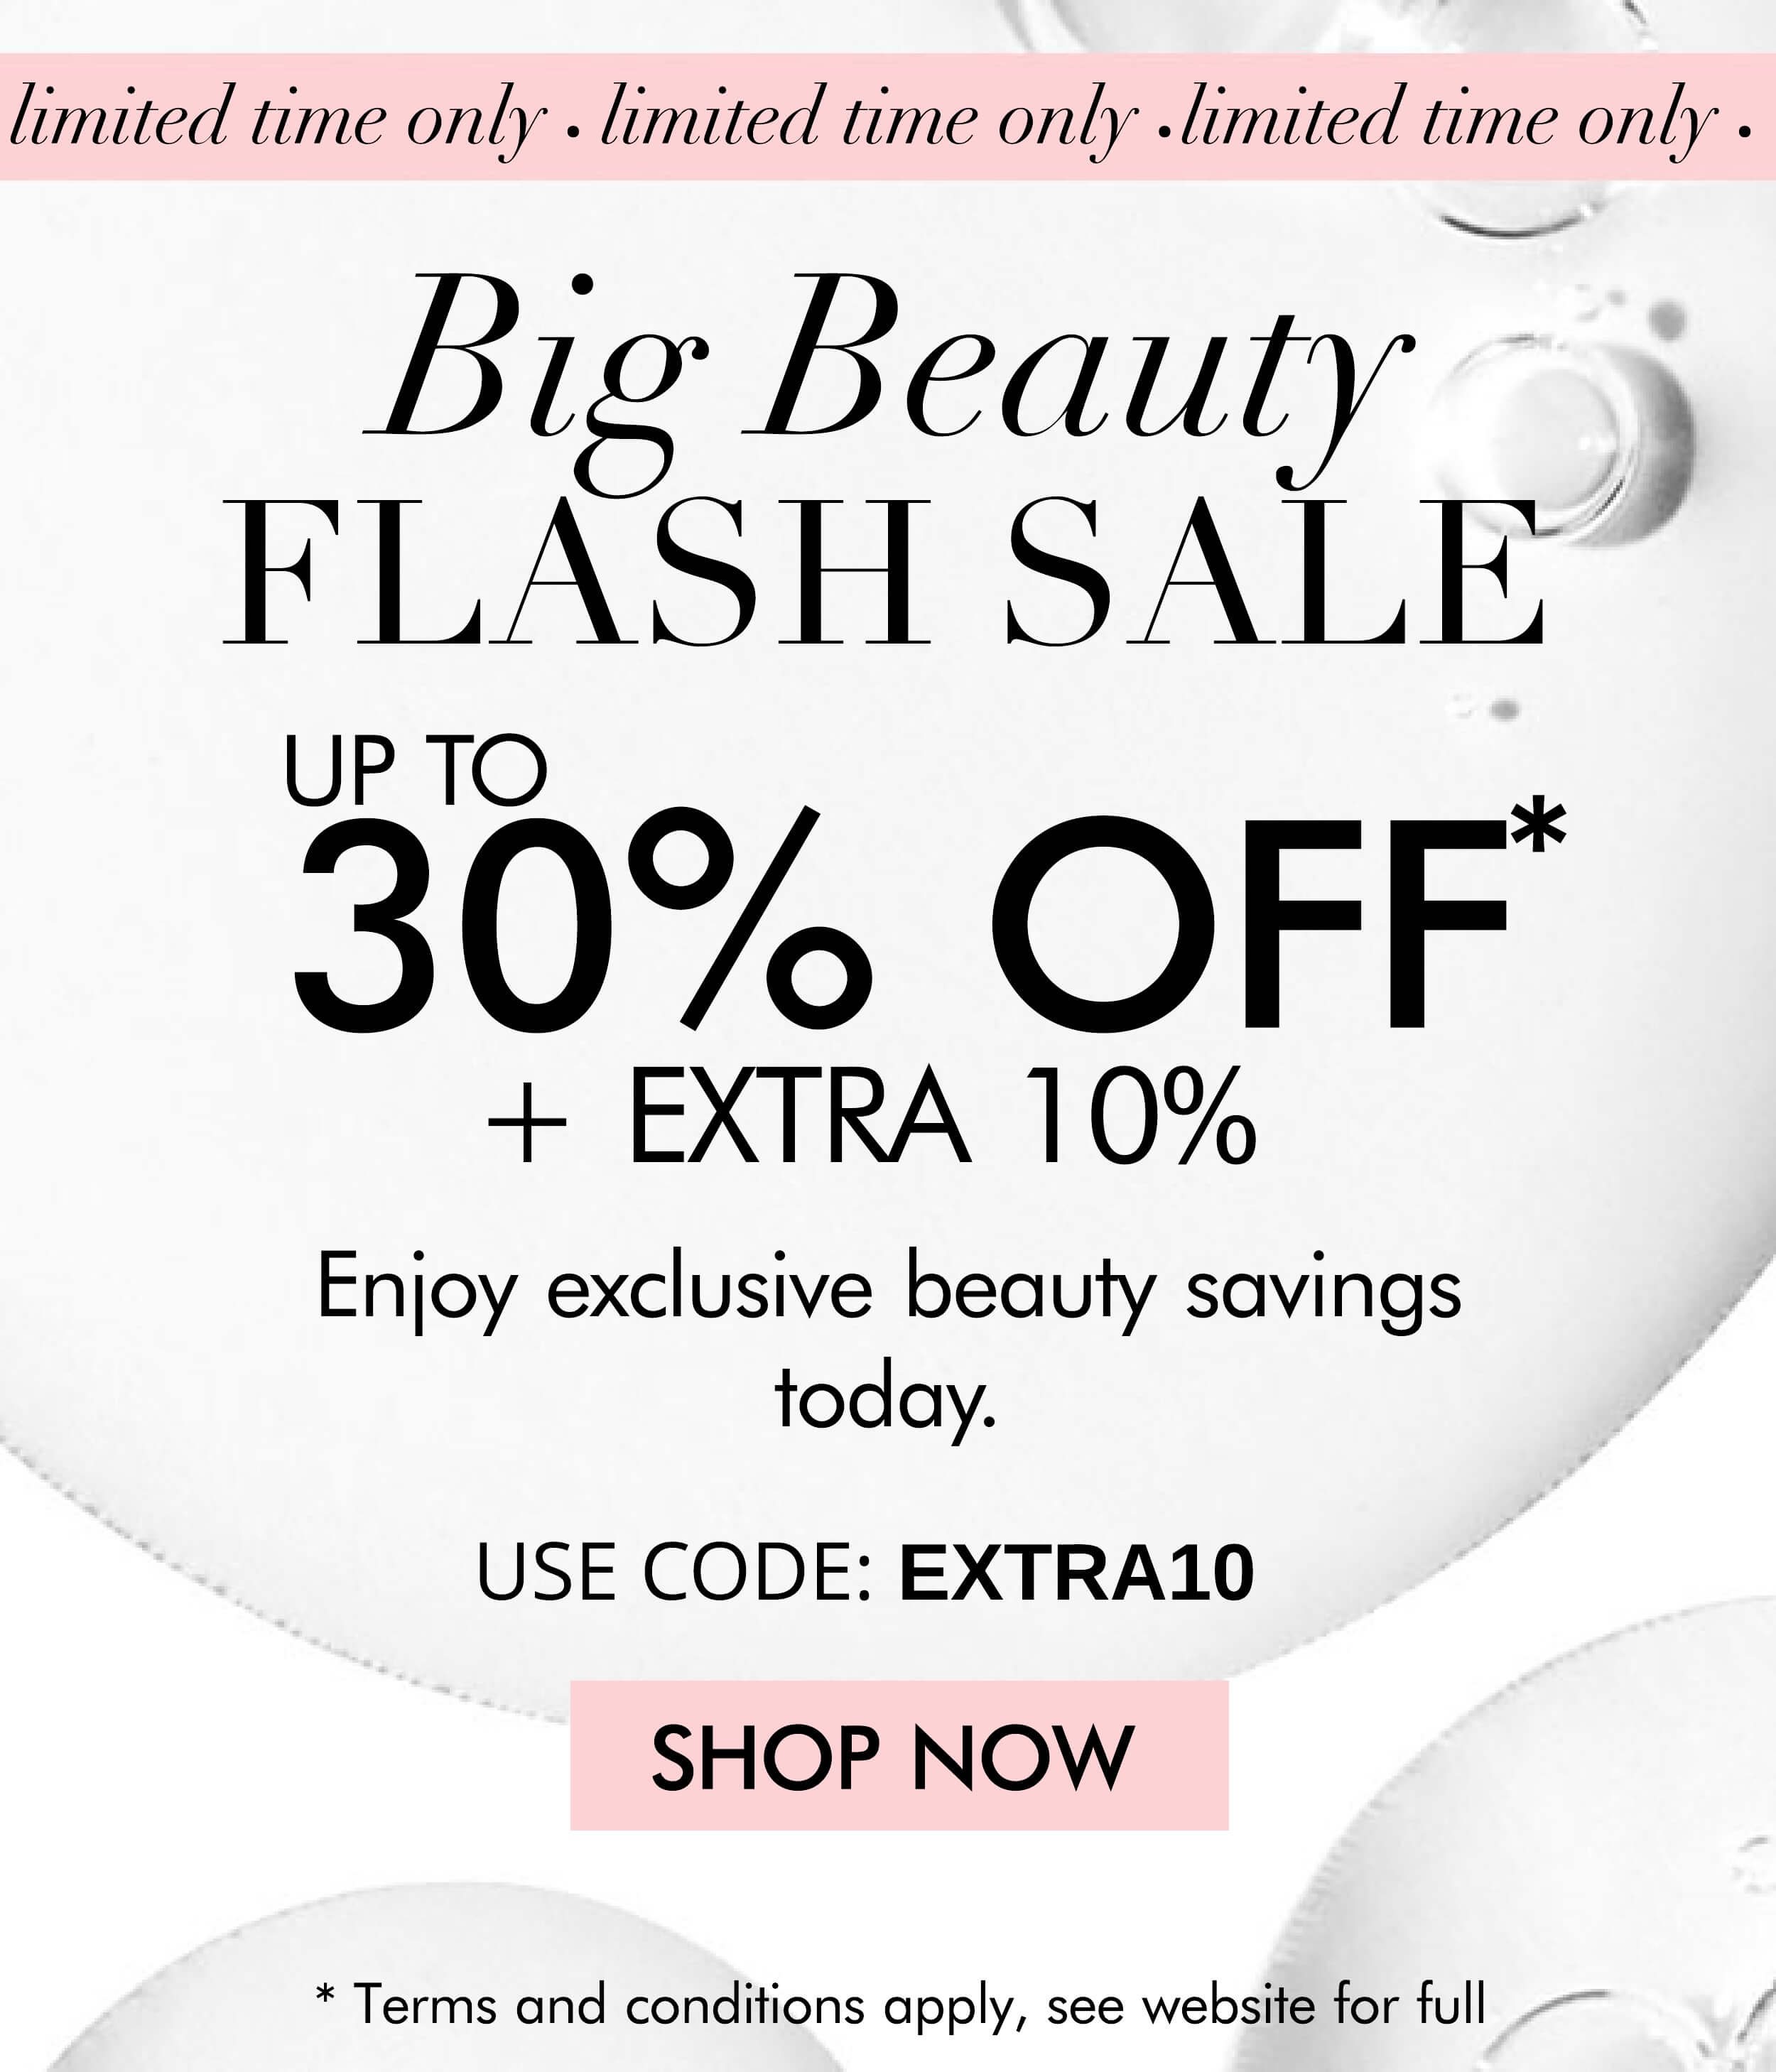 BIG BEAUTY FLASH SALE UP TO 30 PERCENT OFF PLUS EXTRA 10